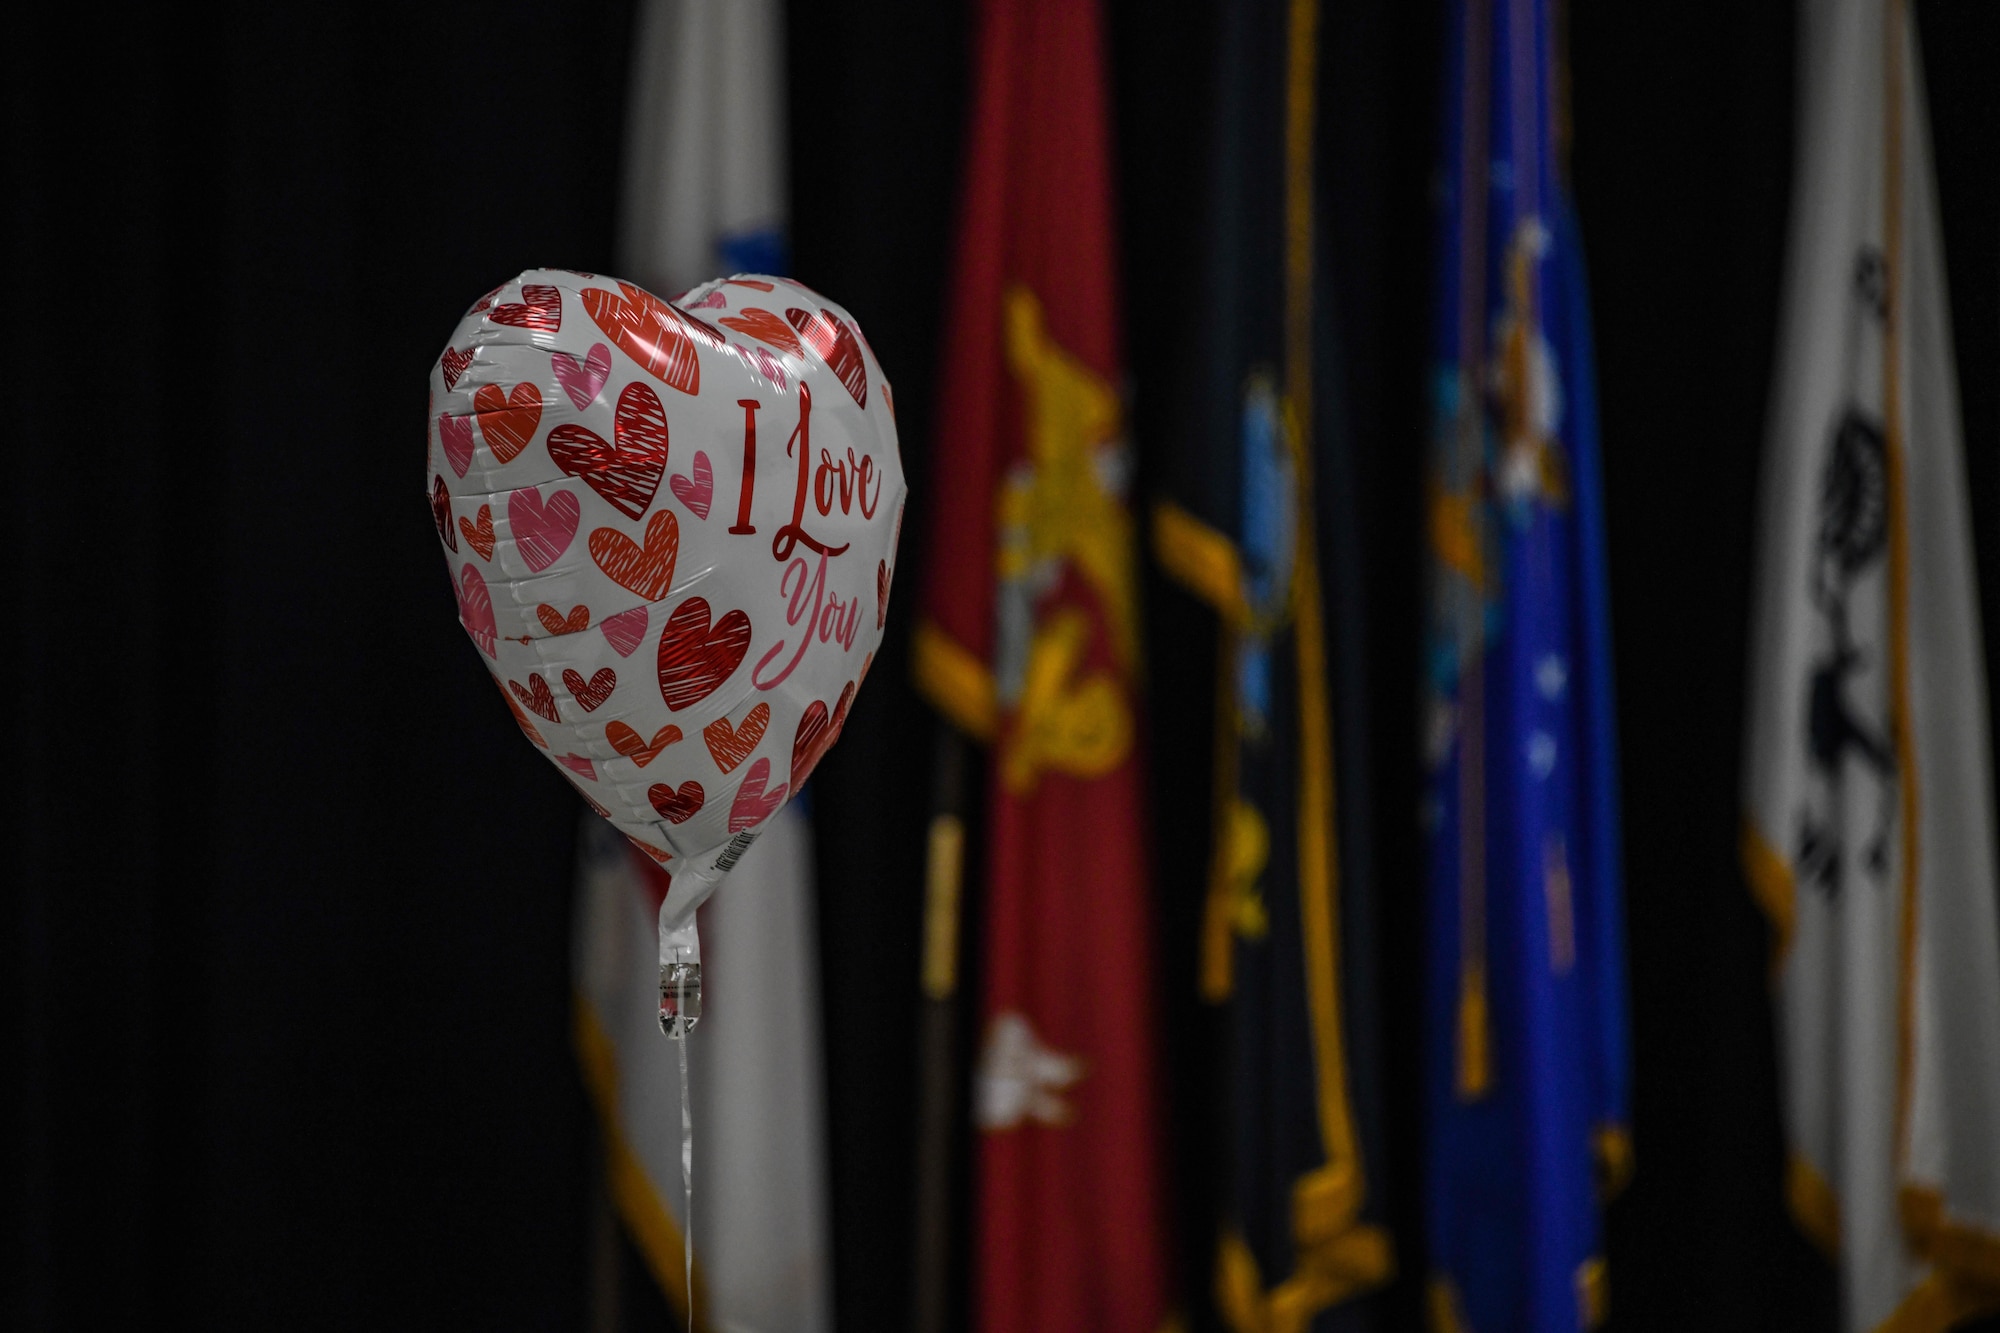 A Valentine’s Day balloon is displayed in the recreational room at the Clinton Veterans Center, Oklahoma, Feb. 14, 2022. Airmen from Altus Air Force Base, Oklahoma, visited five assisted living facilities on Valentine’s Day. (U.S. Air Force photo by Senior Airman Kayla Christenson)